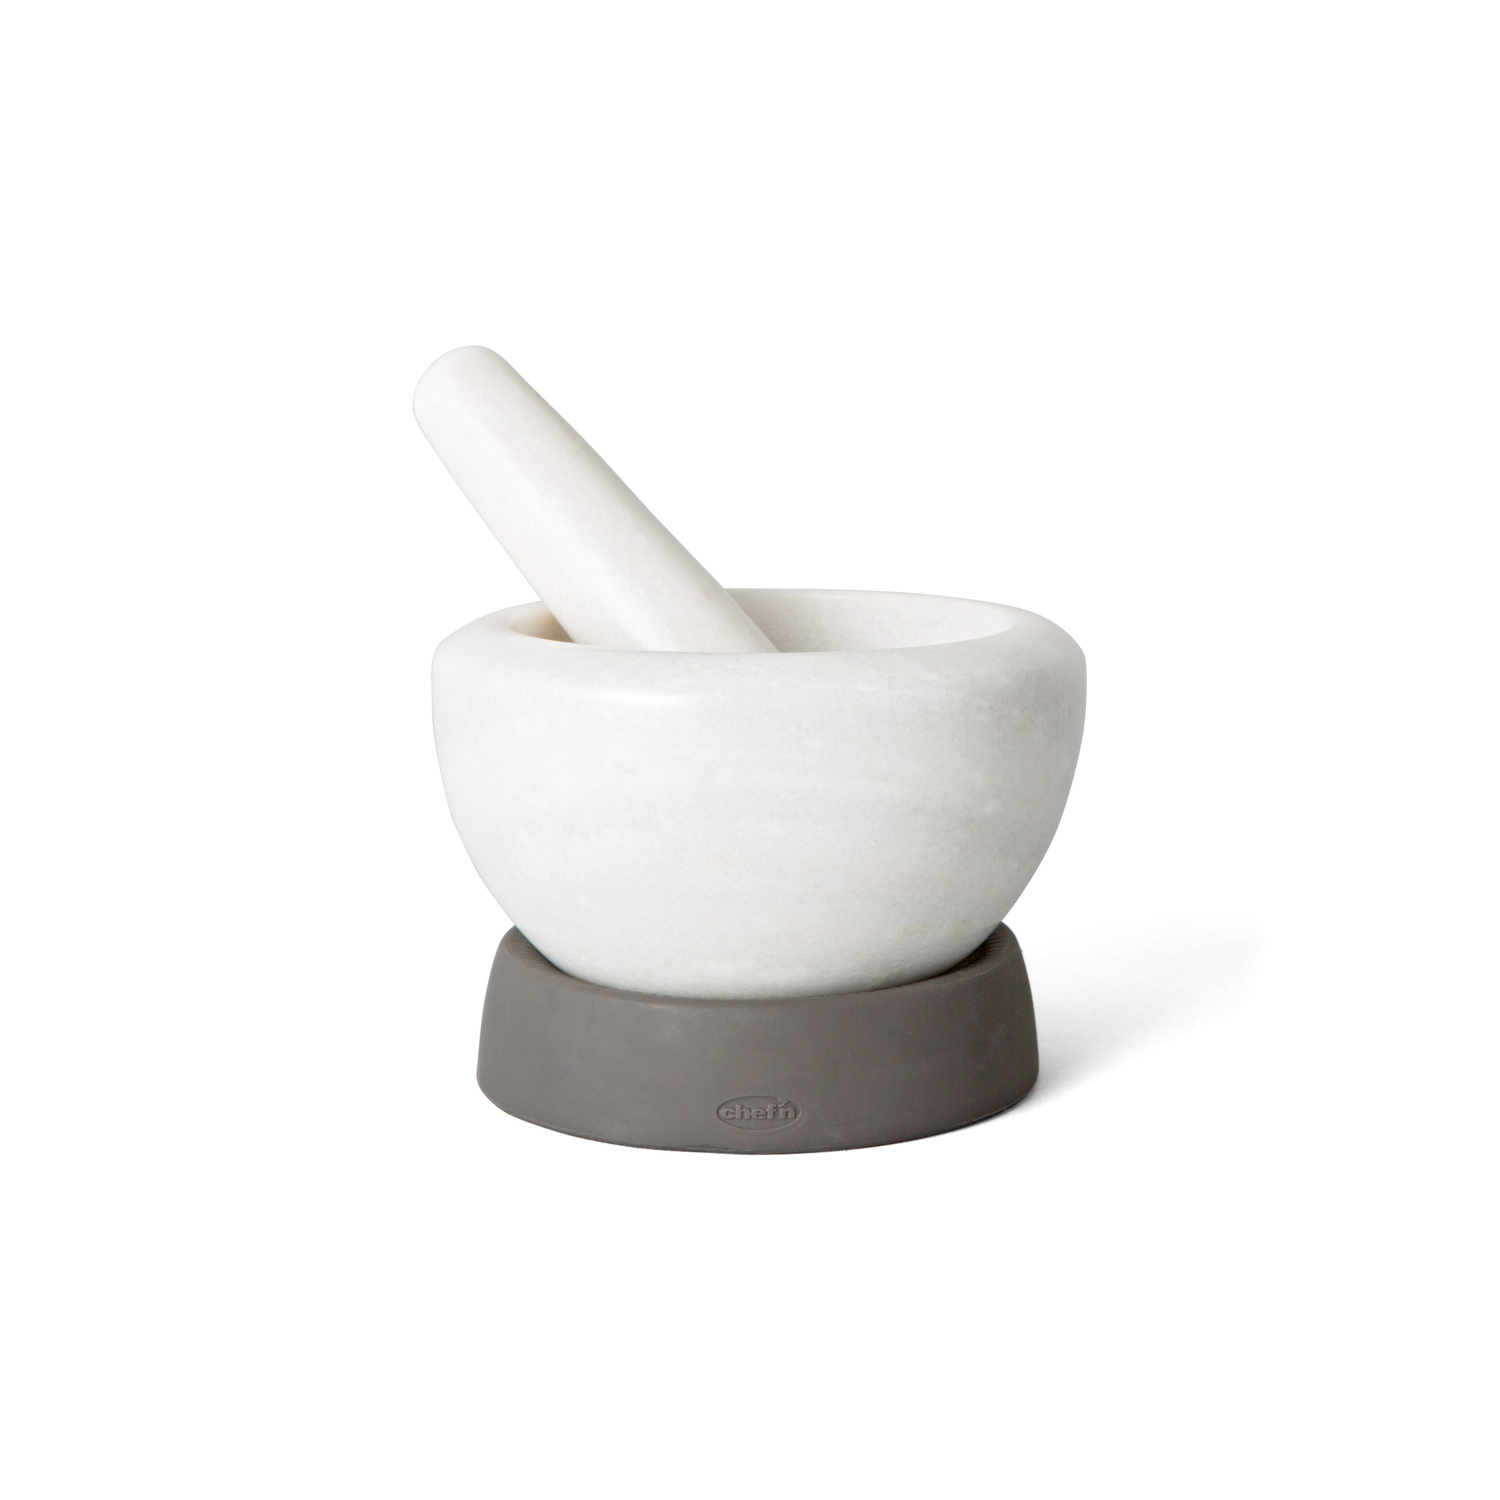 Photos - Other Accessories Chef'n White/Gray Silicone Mortar and Pestle 103-988-354 